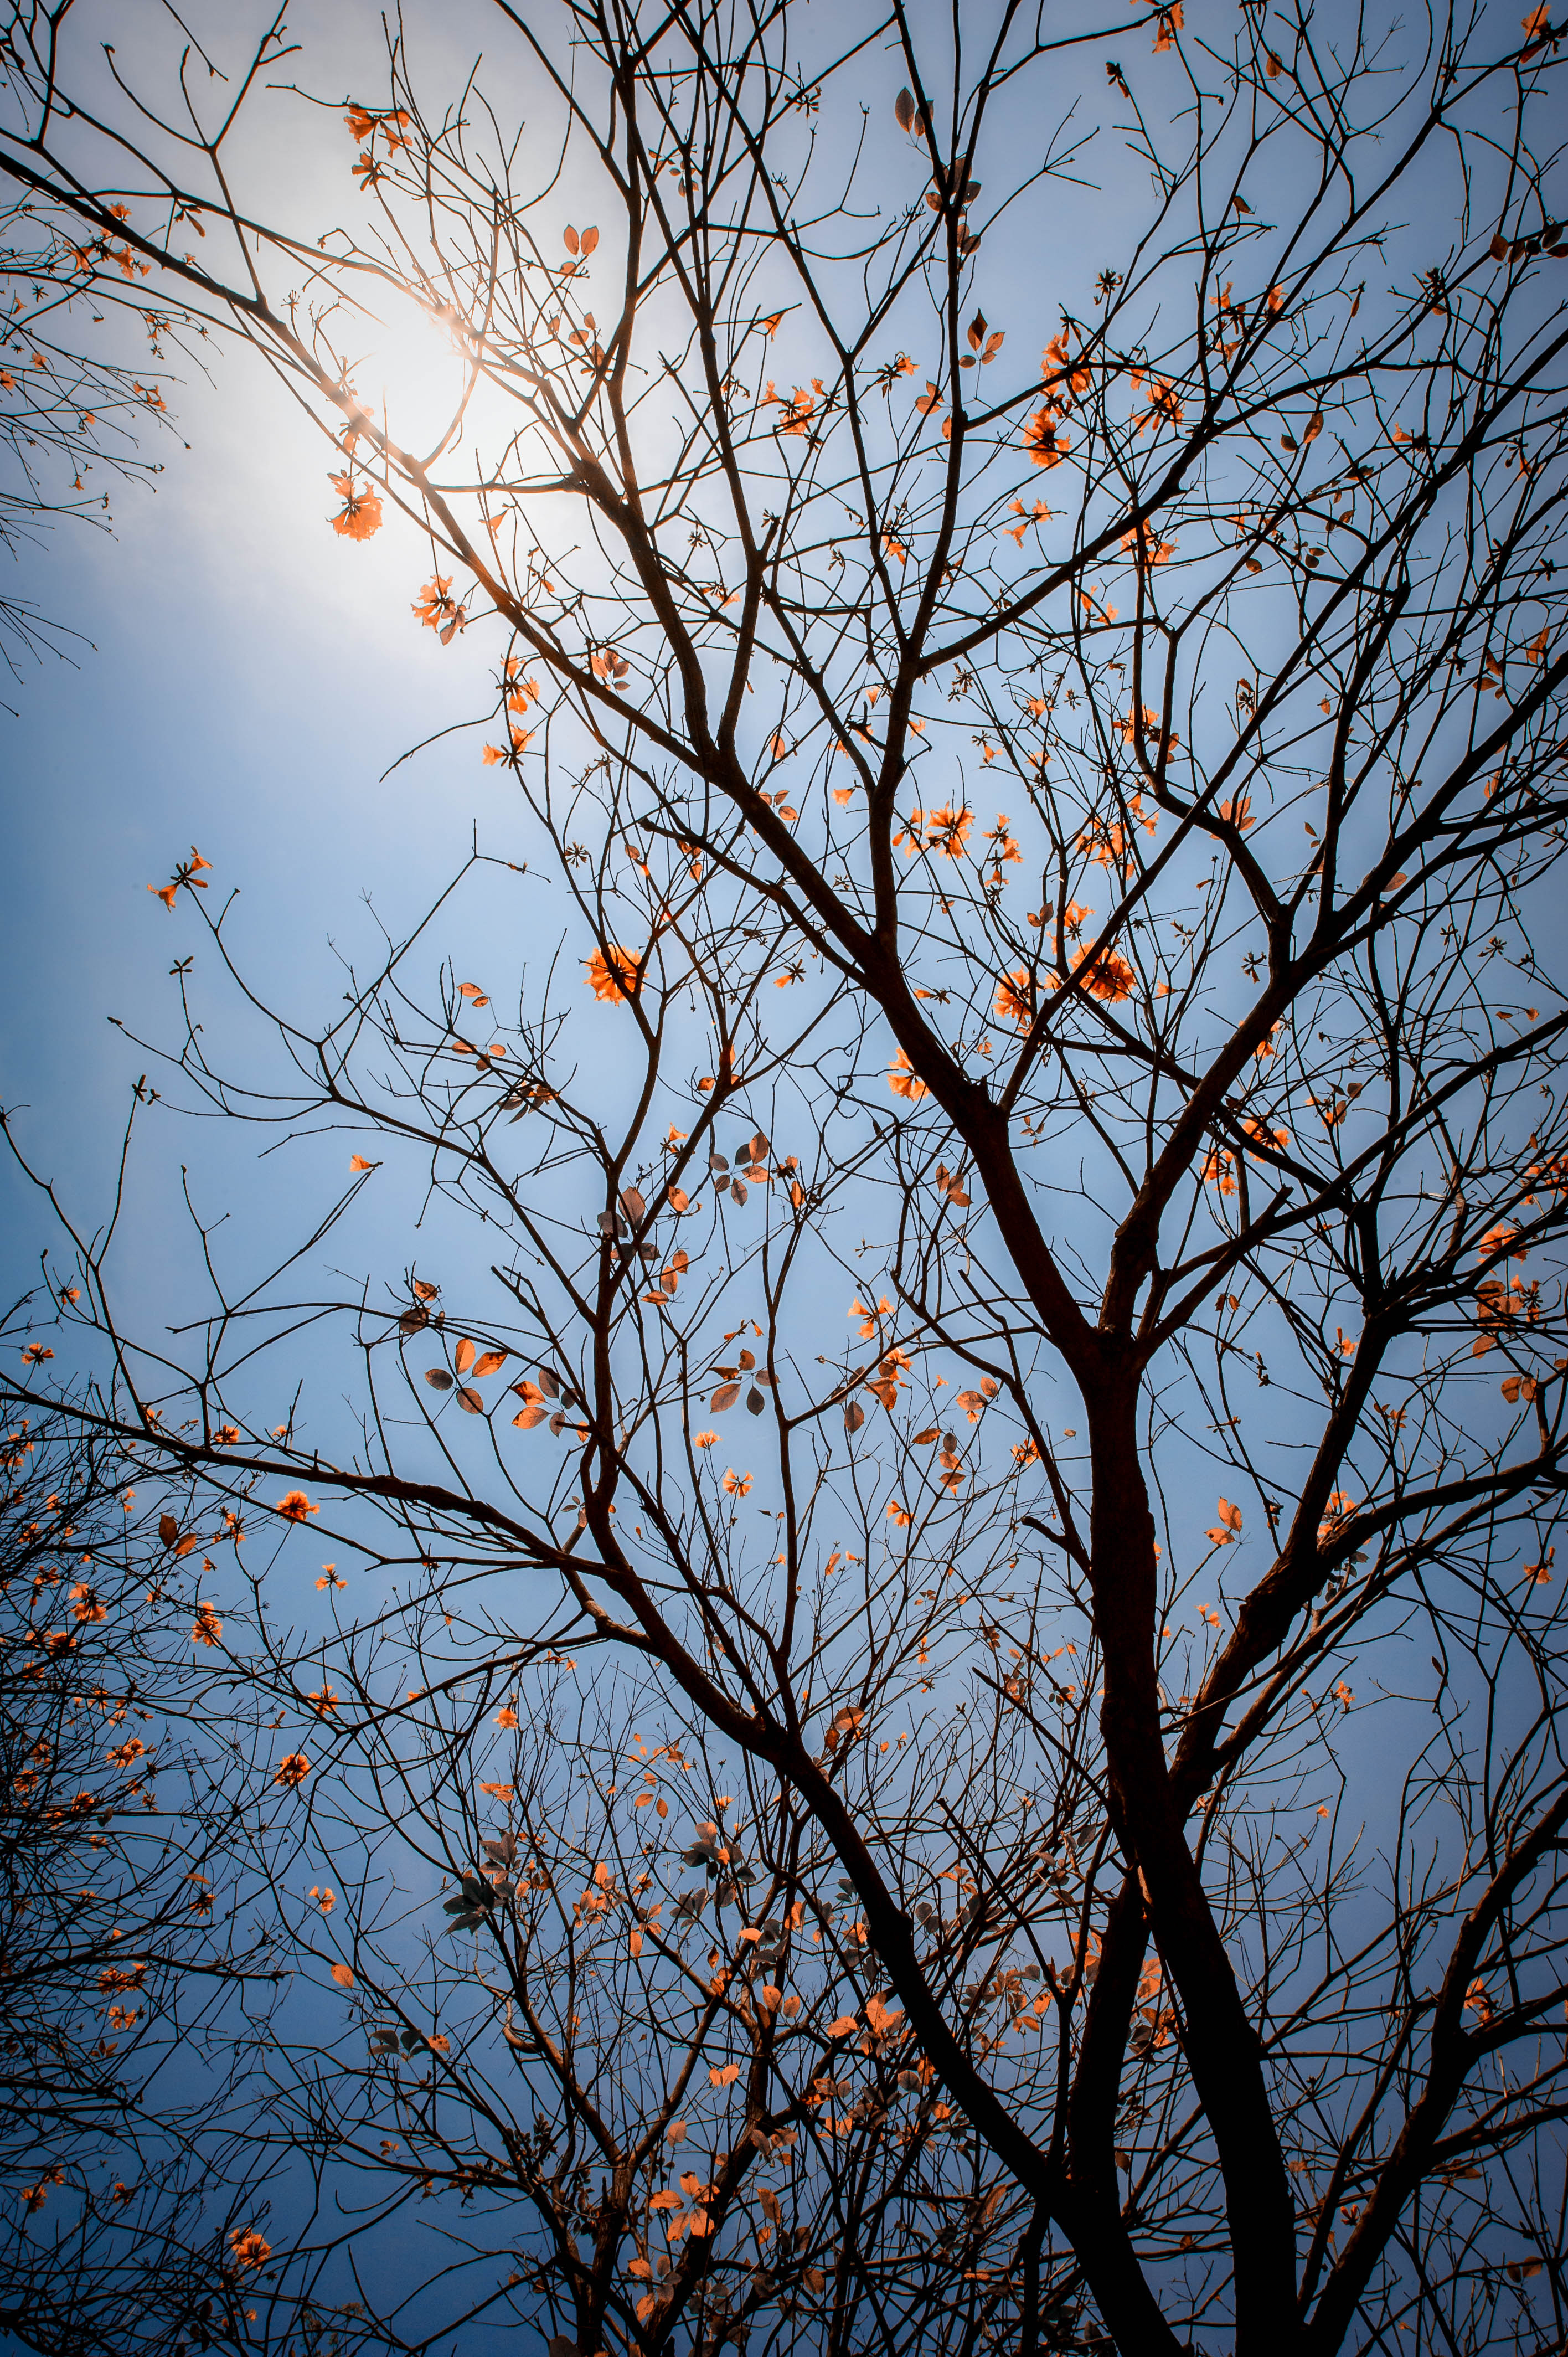 sky, leaves, nature, flowers, wood, tree, branches Full HD